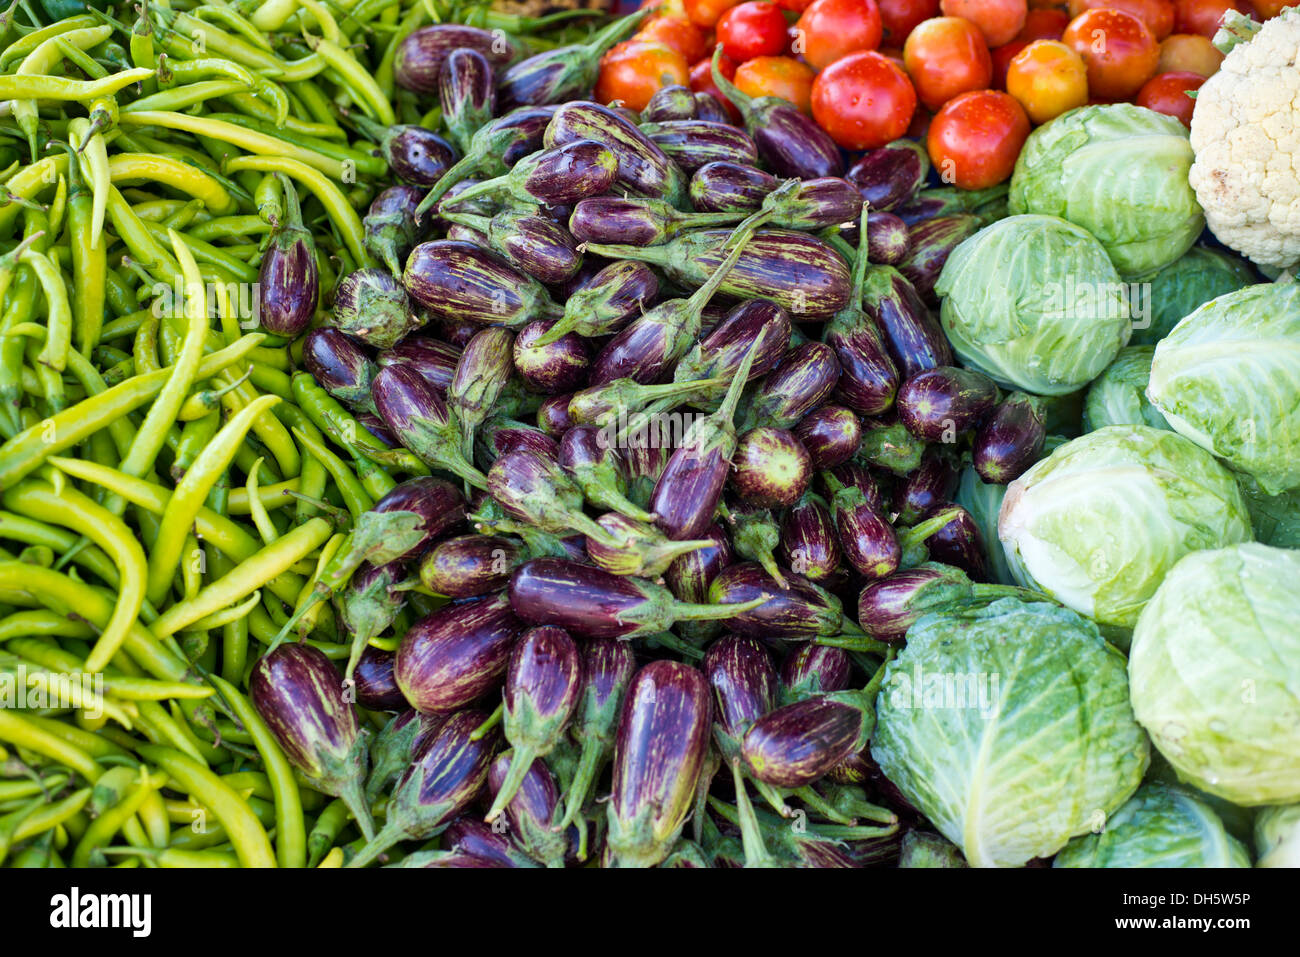 Eggplant, peppers, tomatoes and cabbage, mixed vegetables displayed for sale, Jaisalmer, Rajasthan, India Stock Photo